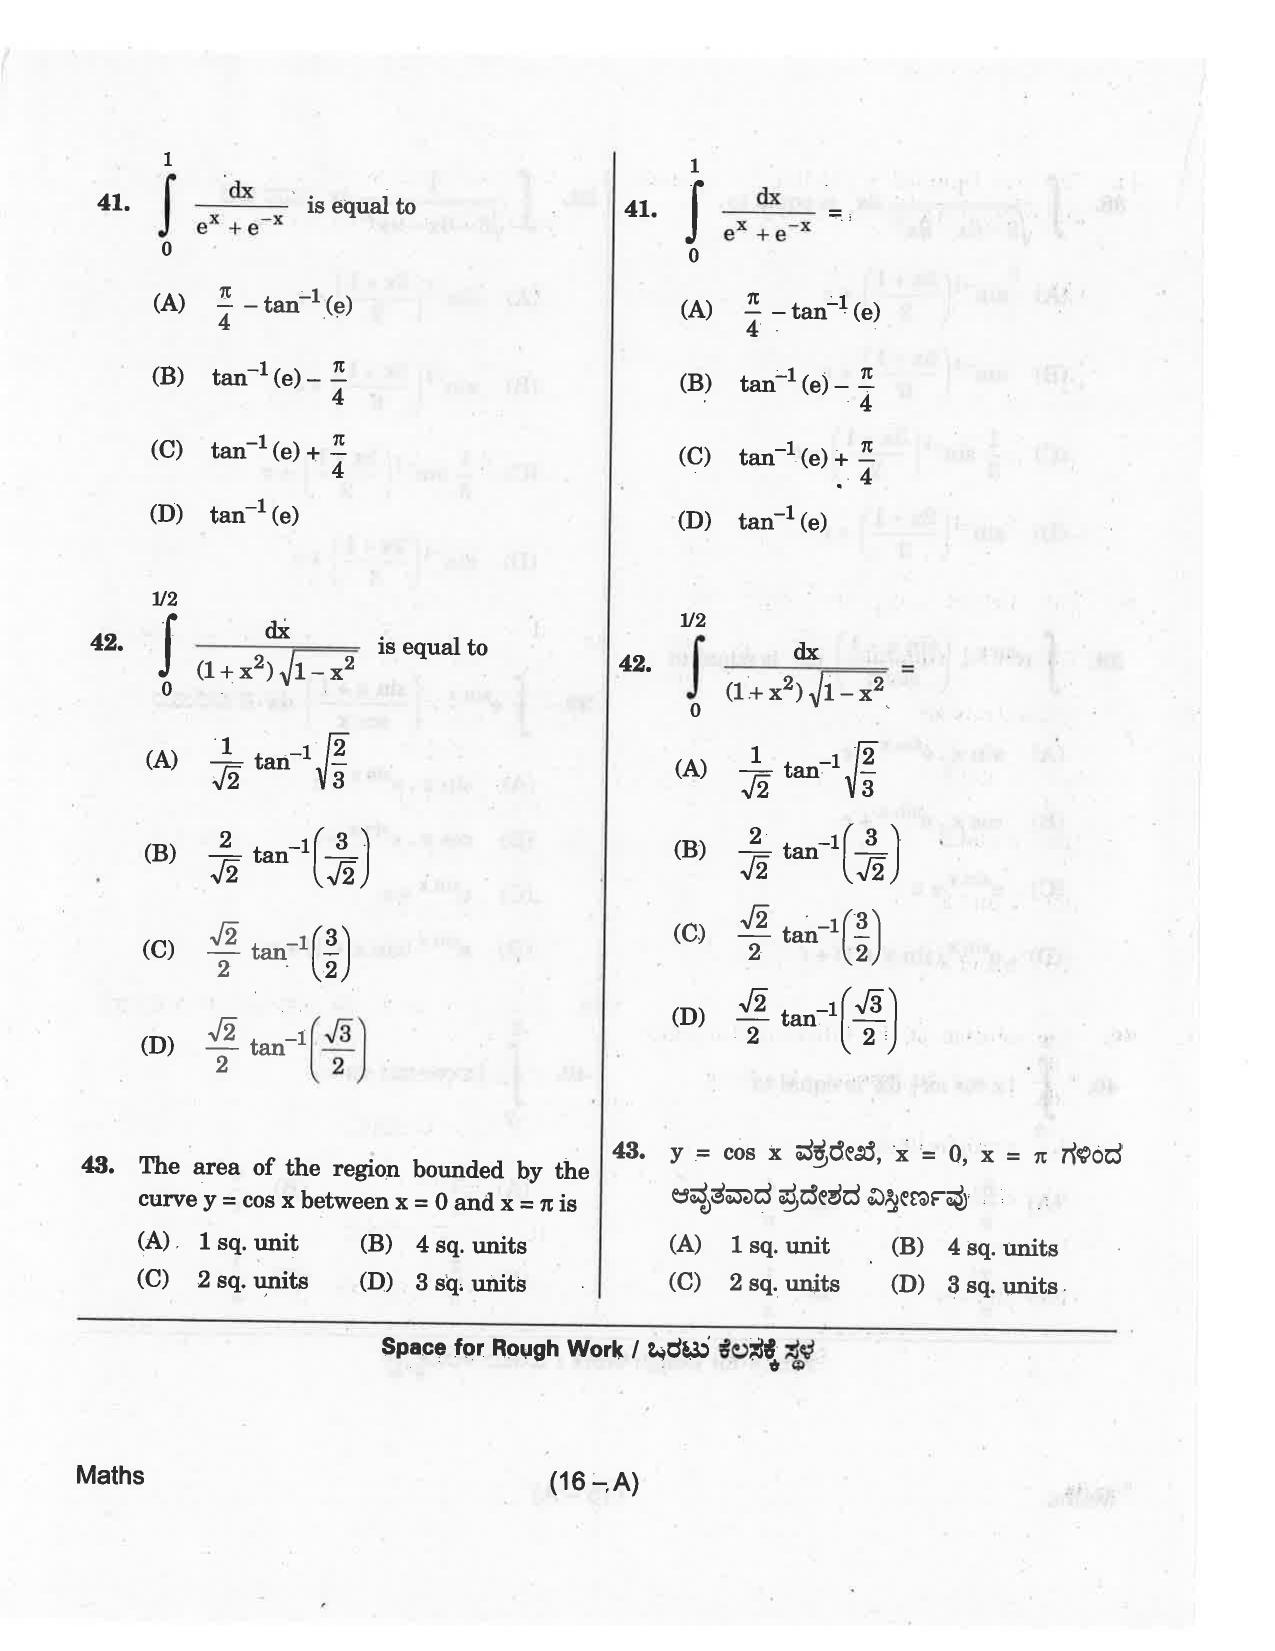 KCET Mathematics 2018 Question Papers - Page 16